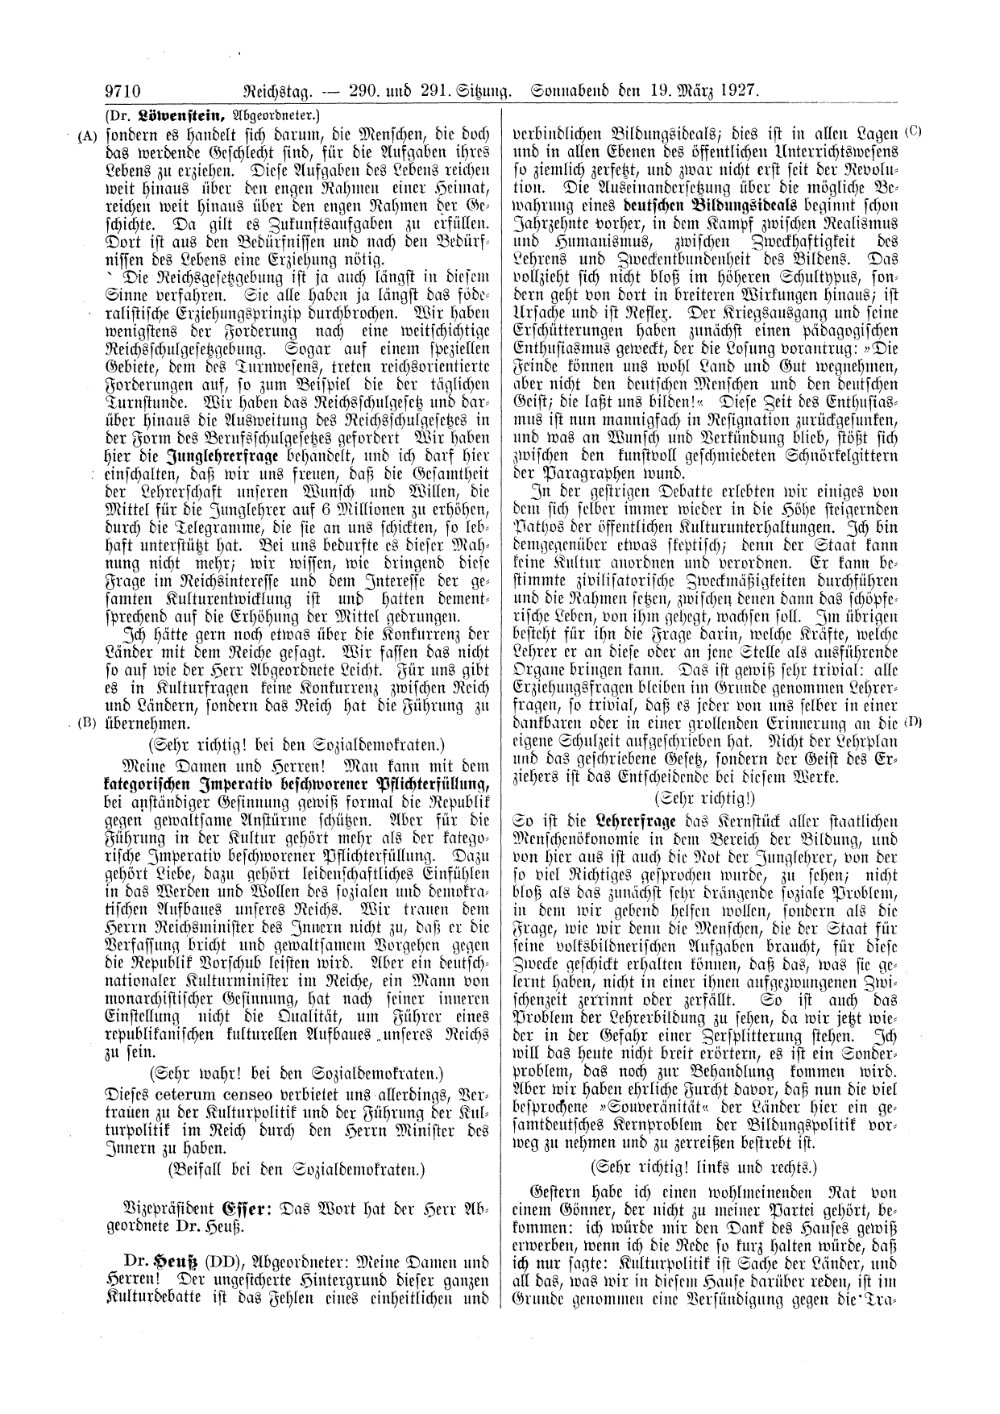 Scan of page 9710